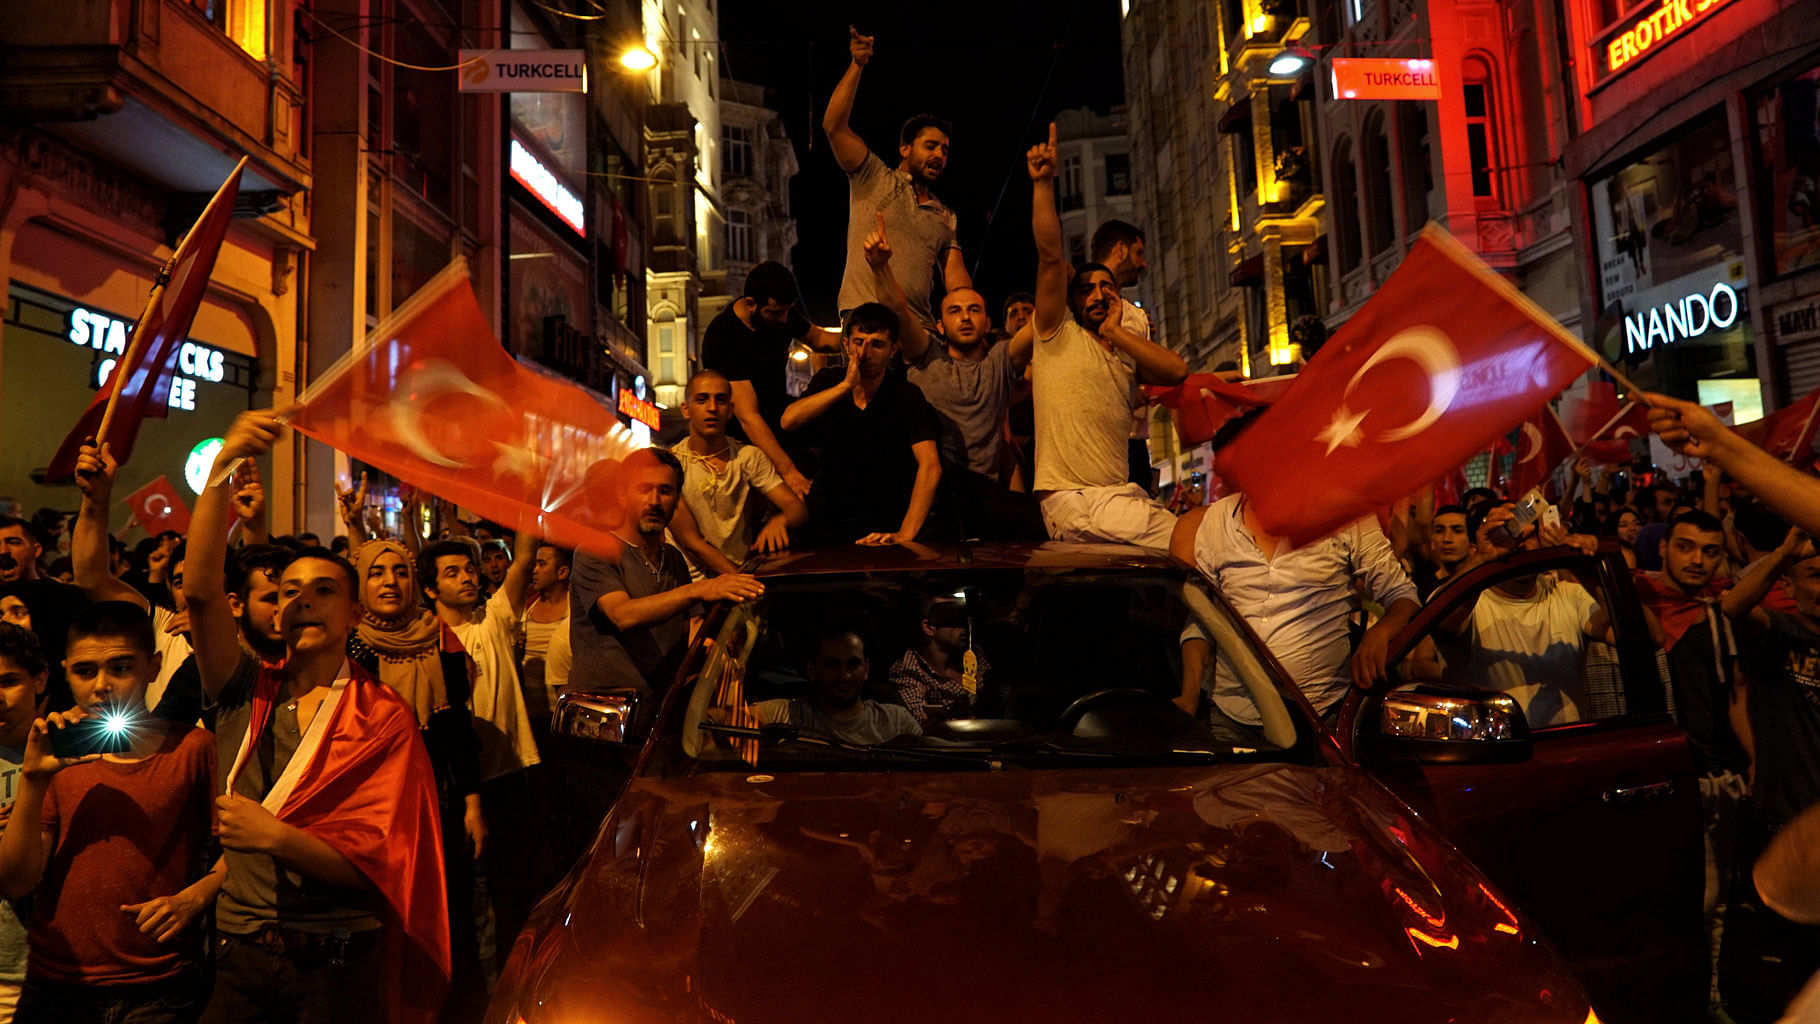 People chant slogans during a pro-government rally in central Istanbul’s Taksim square. (Photo: AP)